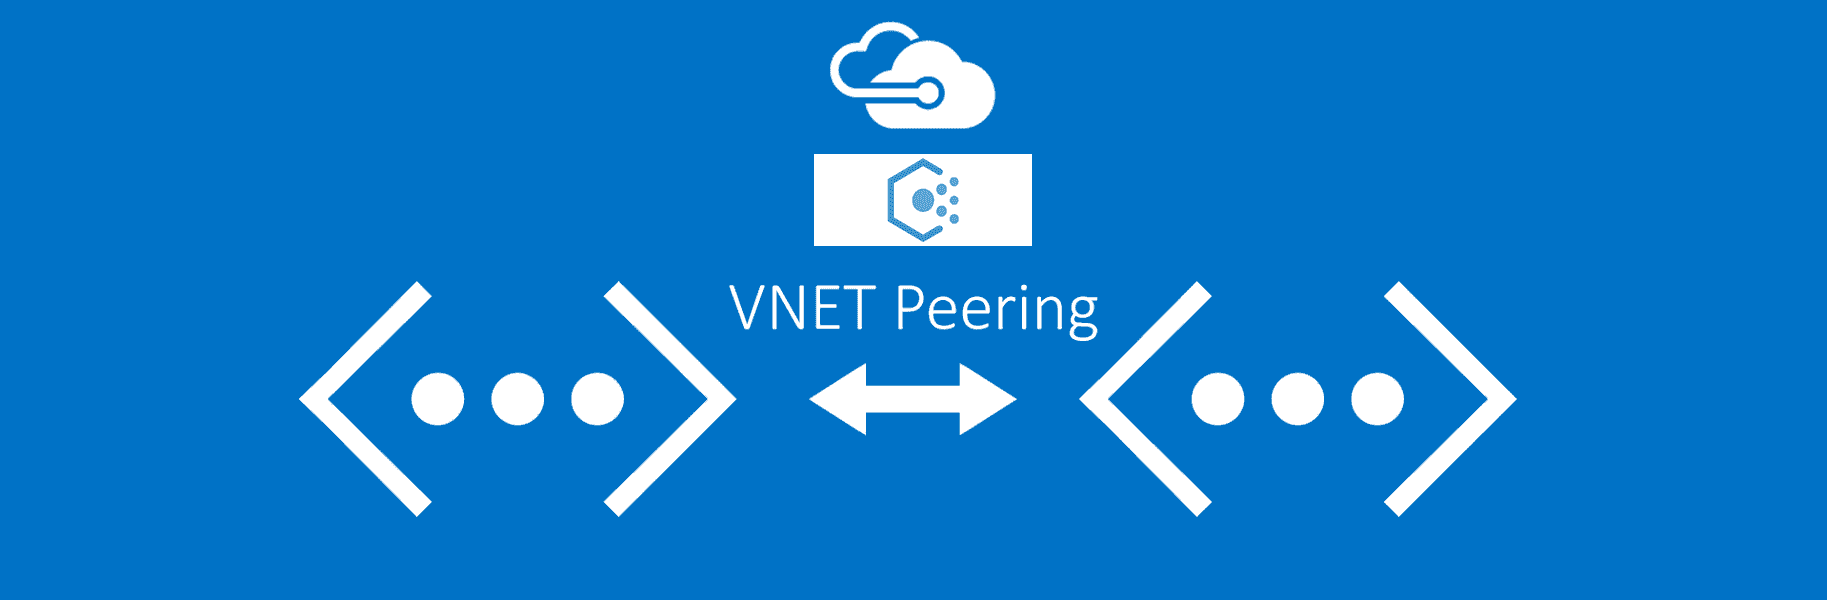 VNet peering using Azure Policy cover image